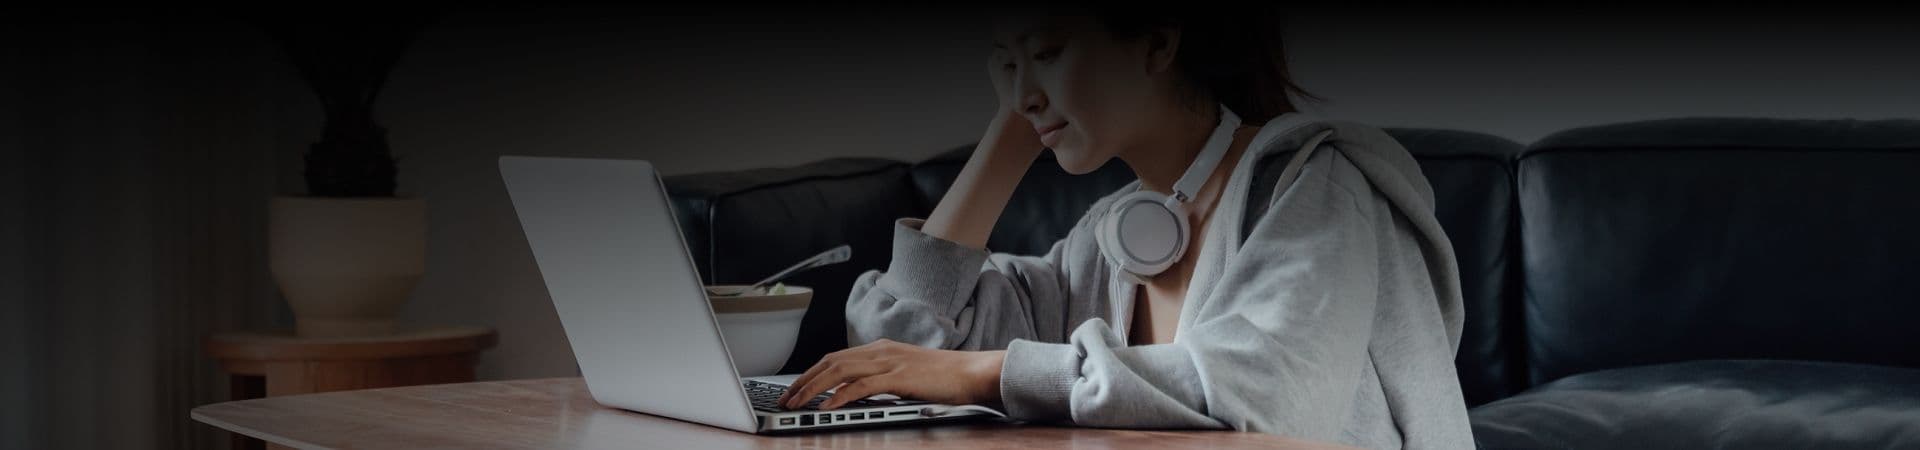 An image of a woman working on her laptop wearing a grey hoodie and headphones around her neck.